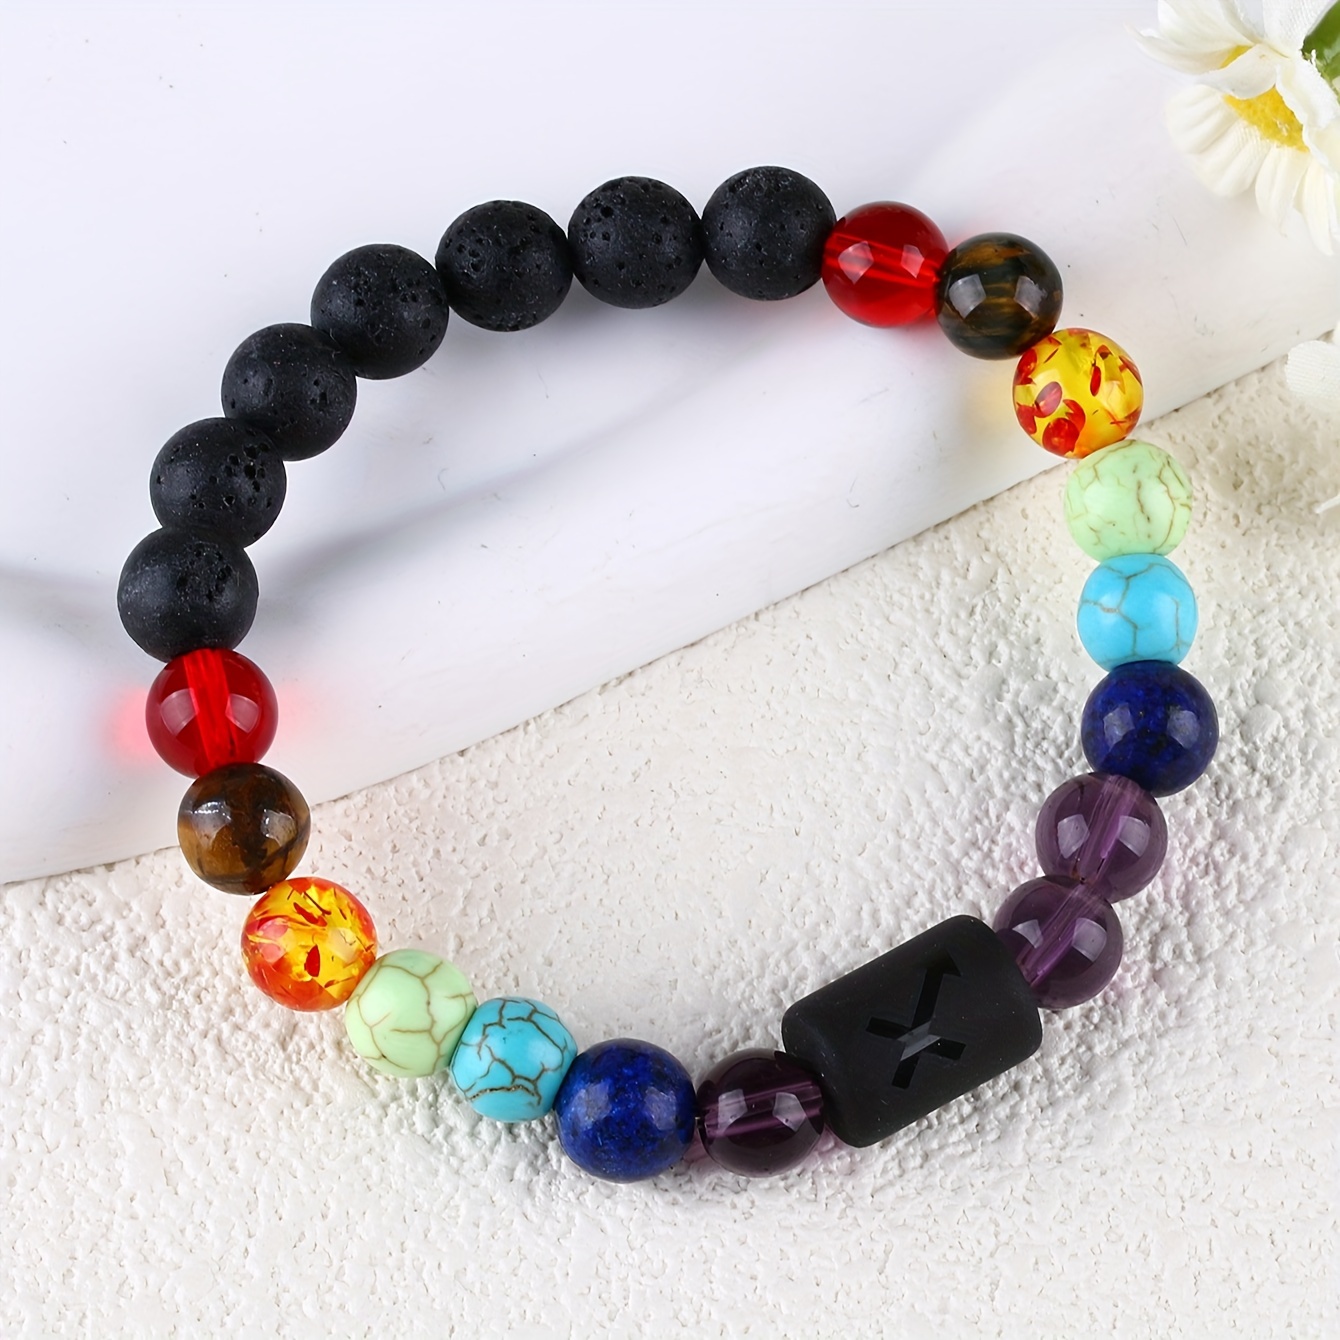 Chakra Lava Stone Bracelet for Alignment and Balance - Anxiety Gone